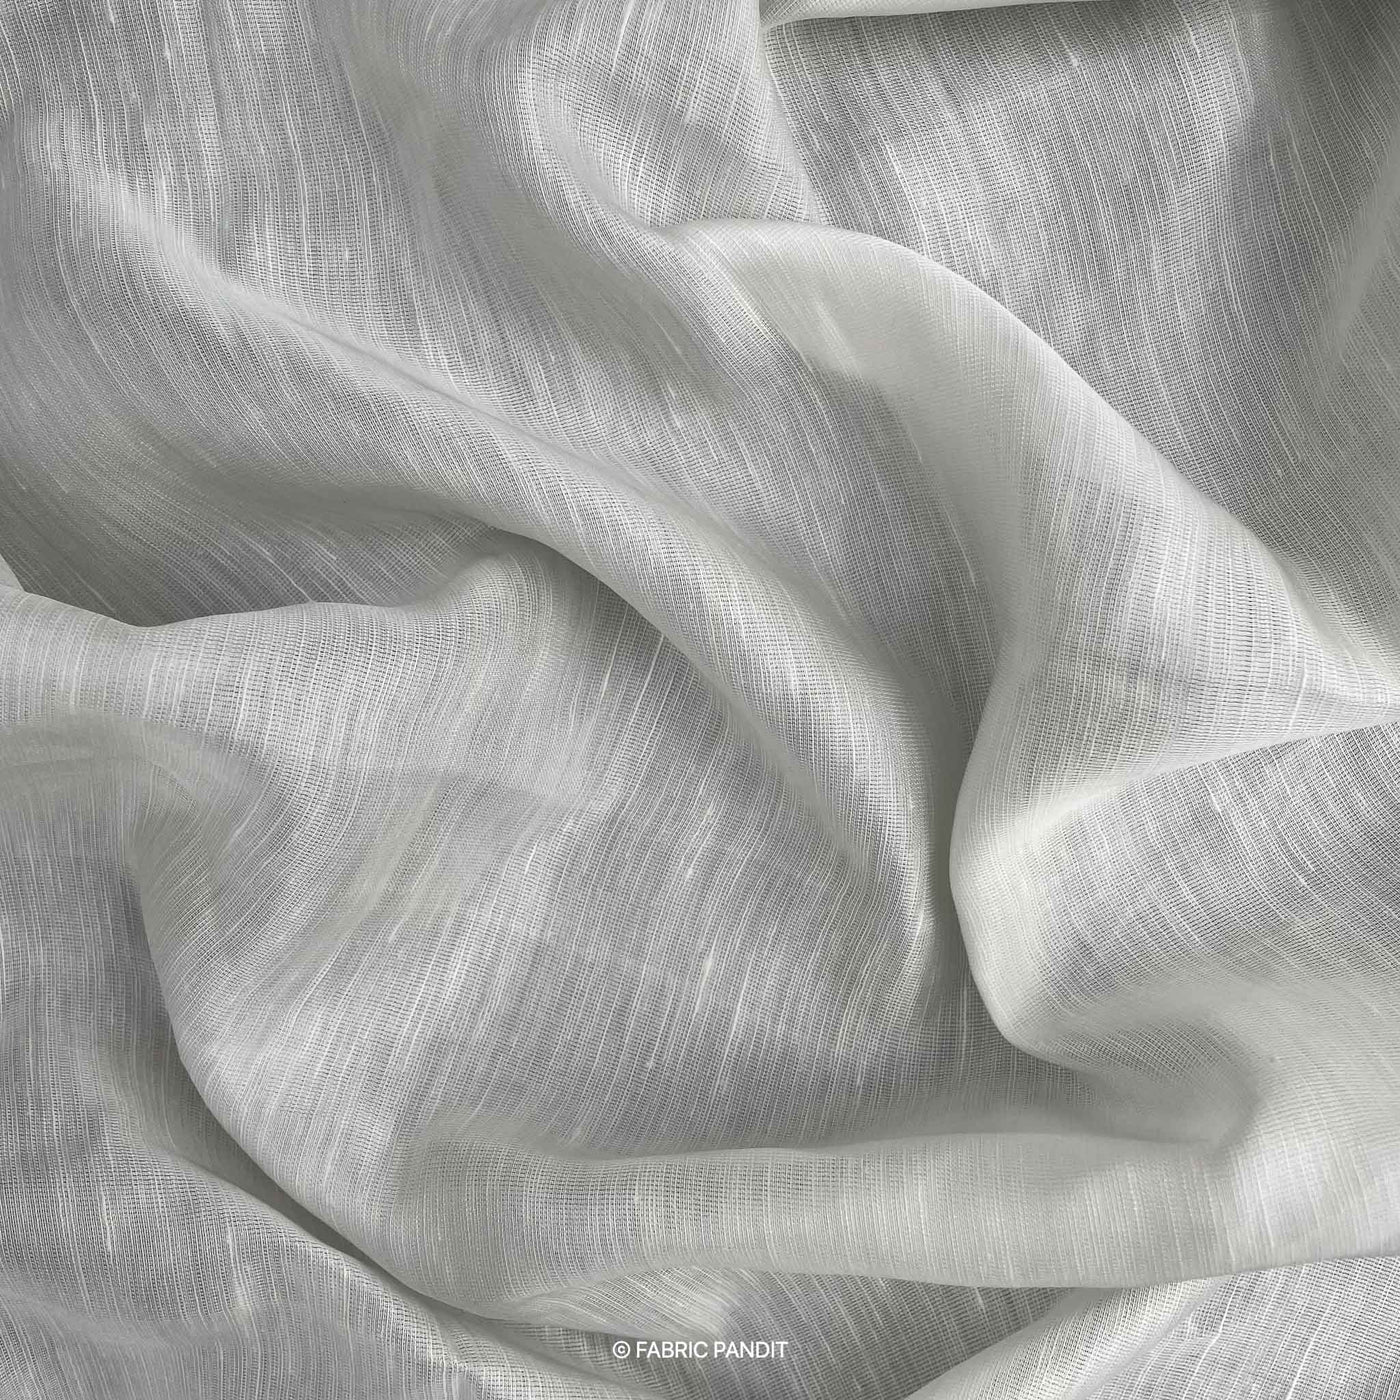 Dyeable Fabric Cut Piece (CUT PIECE) White Dyeable Pure Linen Satin Plain Fabric (Width 44 inches)